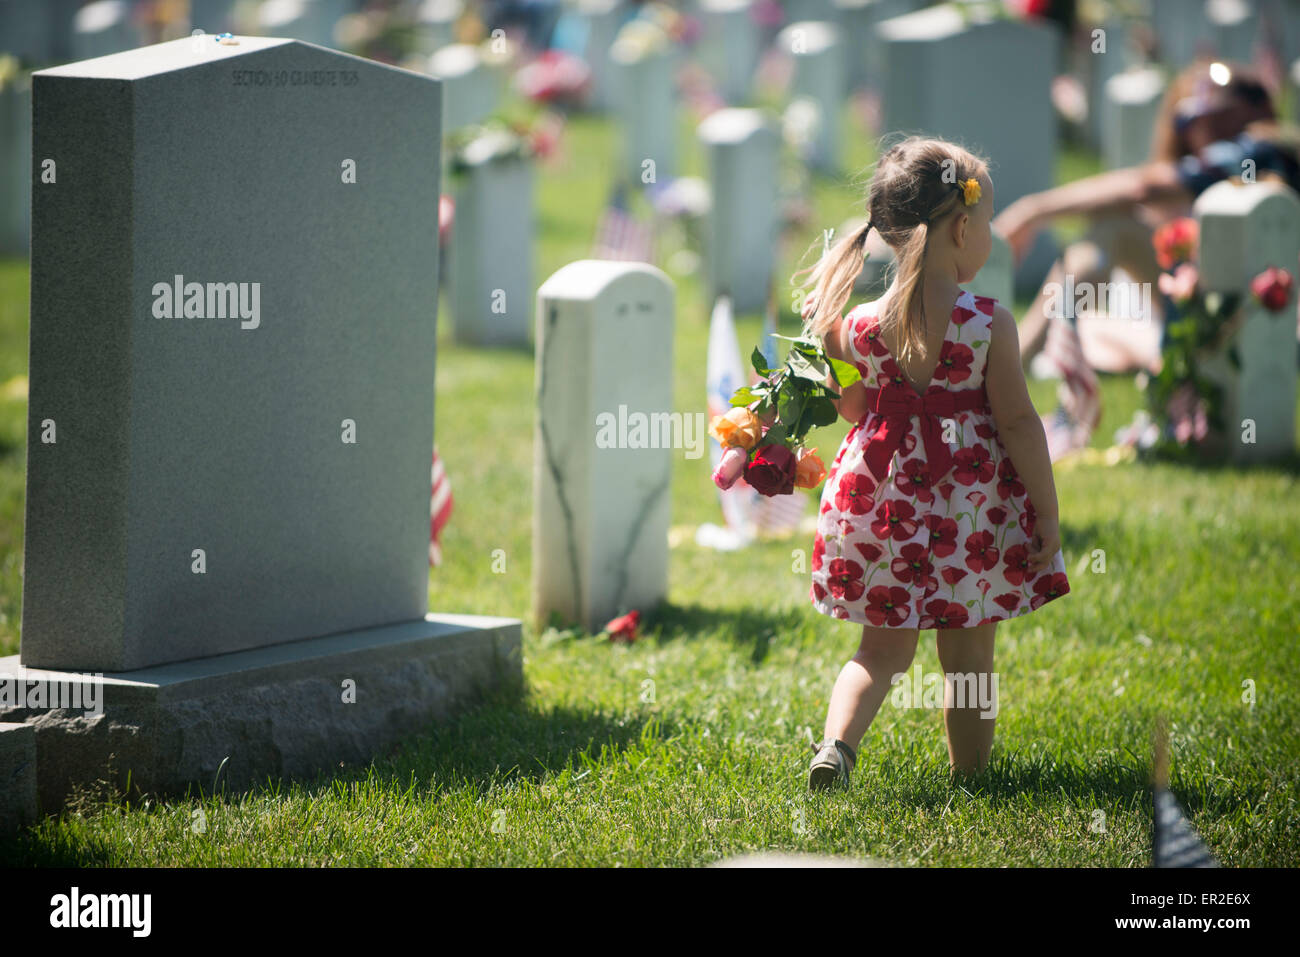 Arlington, Virginia, USA. 25th May, 2015. Genevieve Kynaston, 3, carries roses as she walks past grave markers in Arlington National Cemetery on Memorial Day May 25, 2015 in Arlington, Virginia. Credit:  Planetpix/Alamy Live News Stock Photo